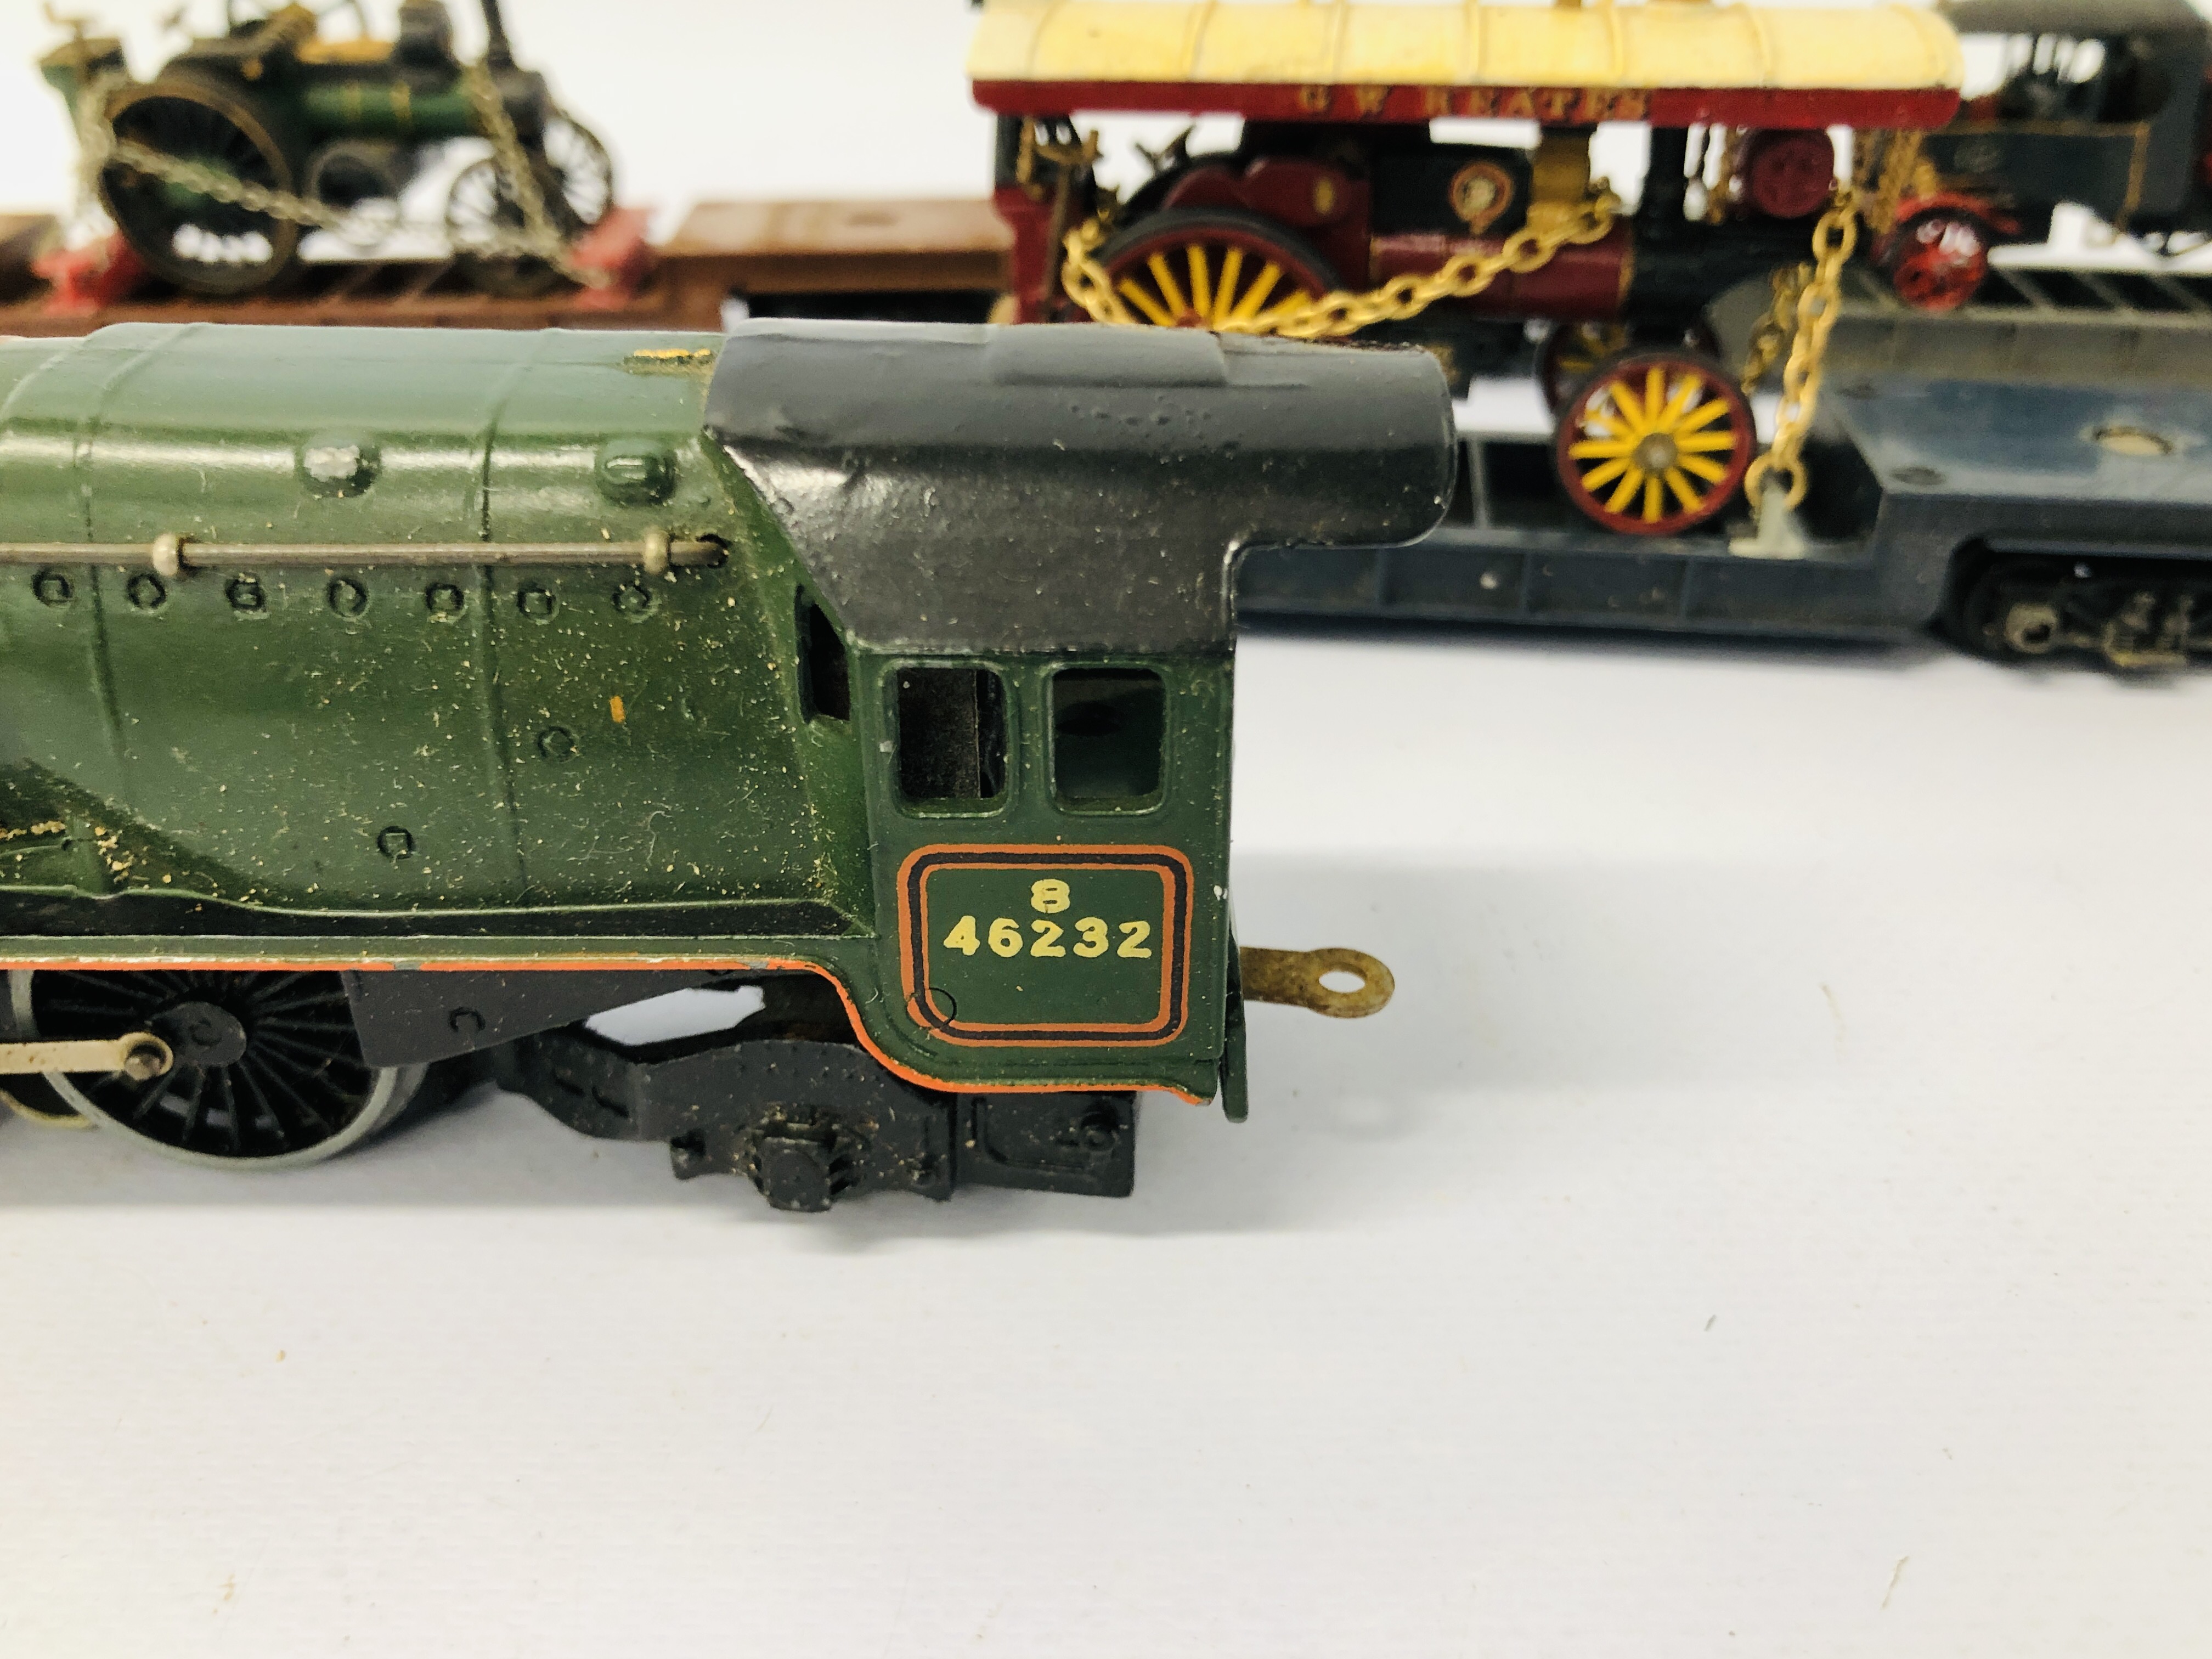 A HORNBY DUBO MECCANO 00 GAUGE DUCHESS OF MONTROSE LOCOMOTIVE & 3 TRIANG 00 GAUGE WAGONS WITH CARGO - Image 4 of 14